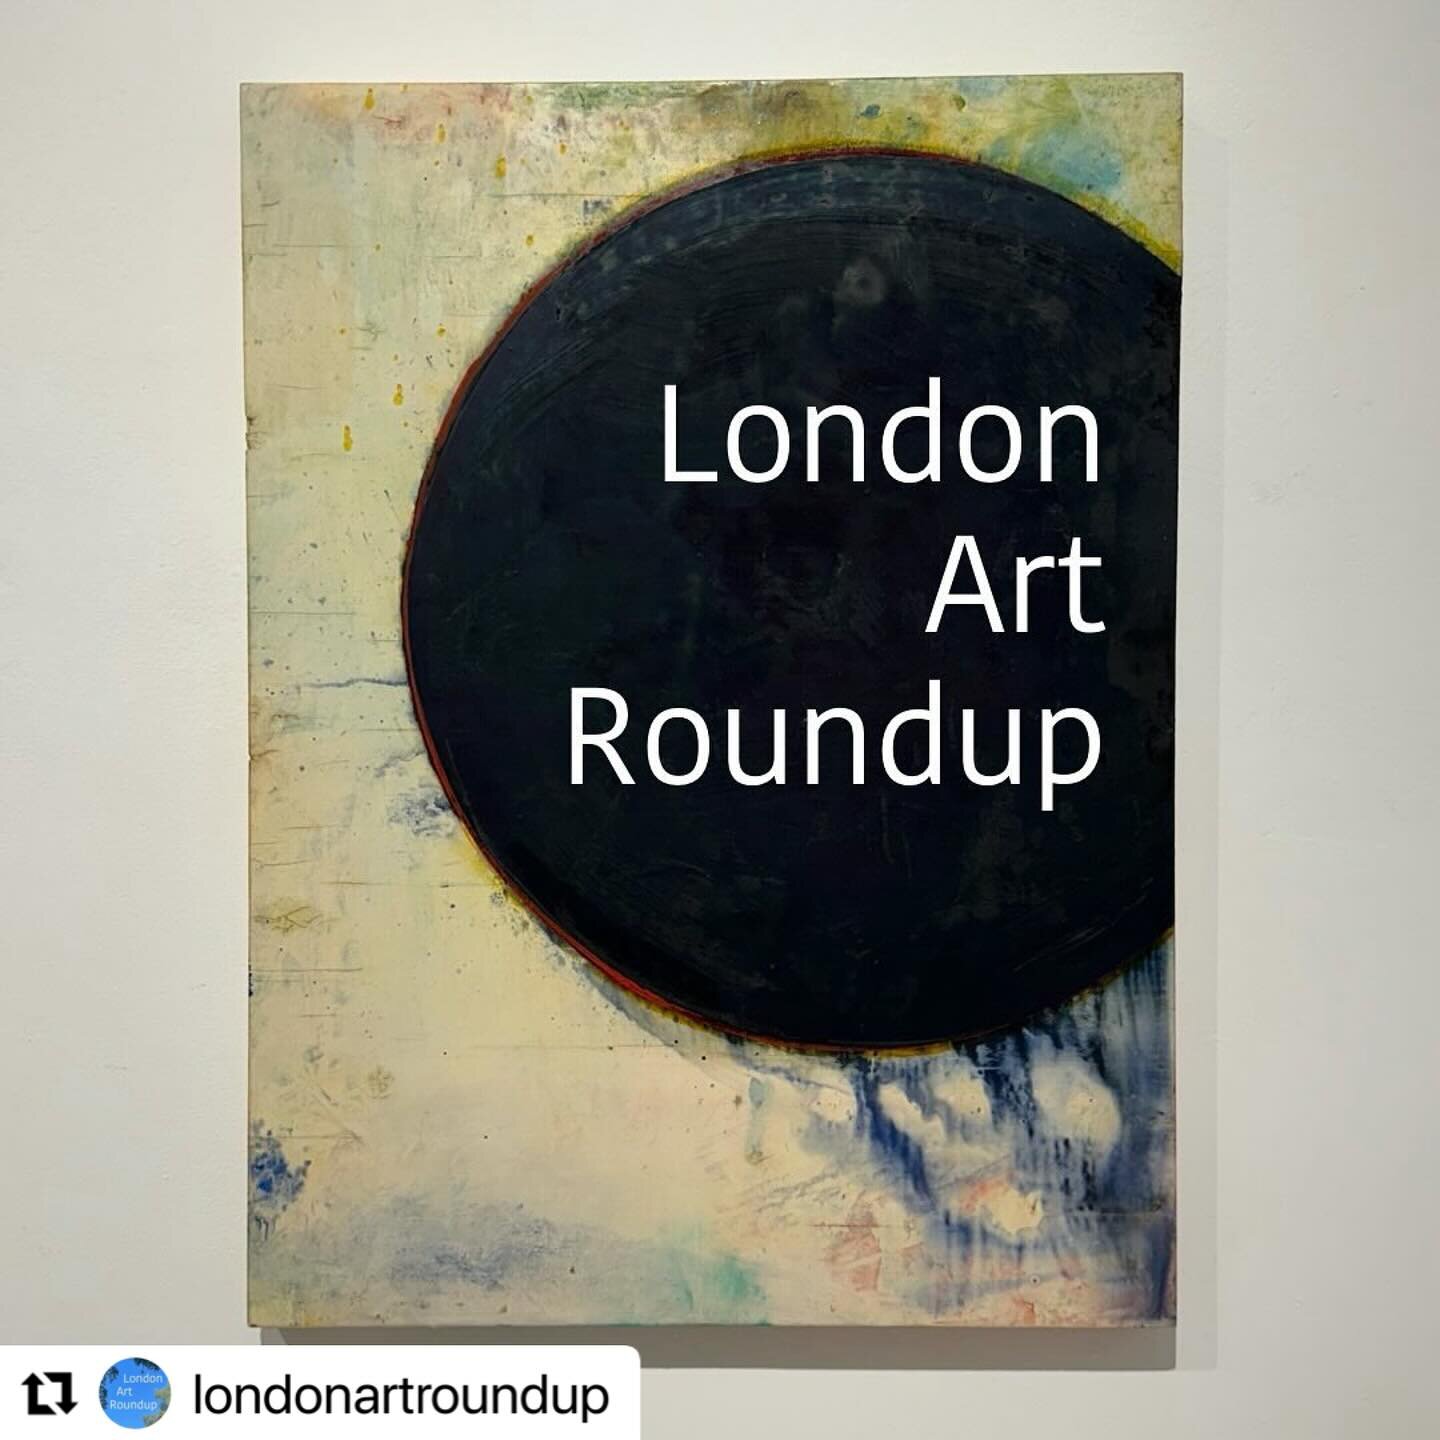 A little mention + cover for issue 90 @londonartround for Chasing Elsewhere curated by Karen Tronel  @karentronel